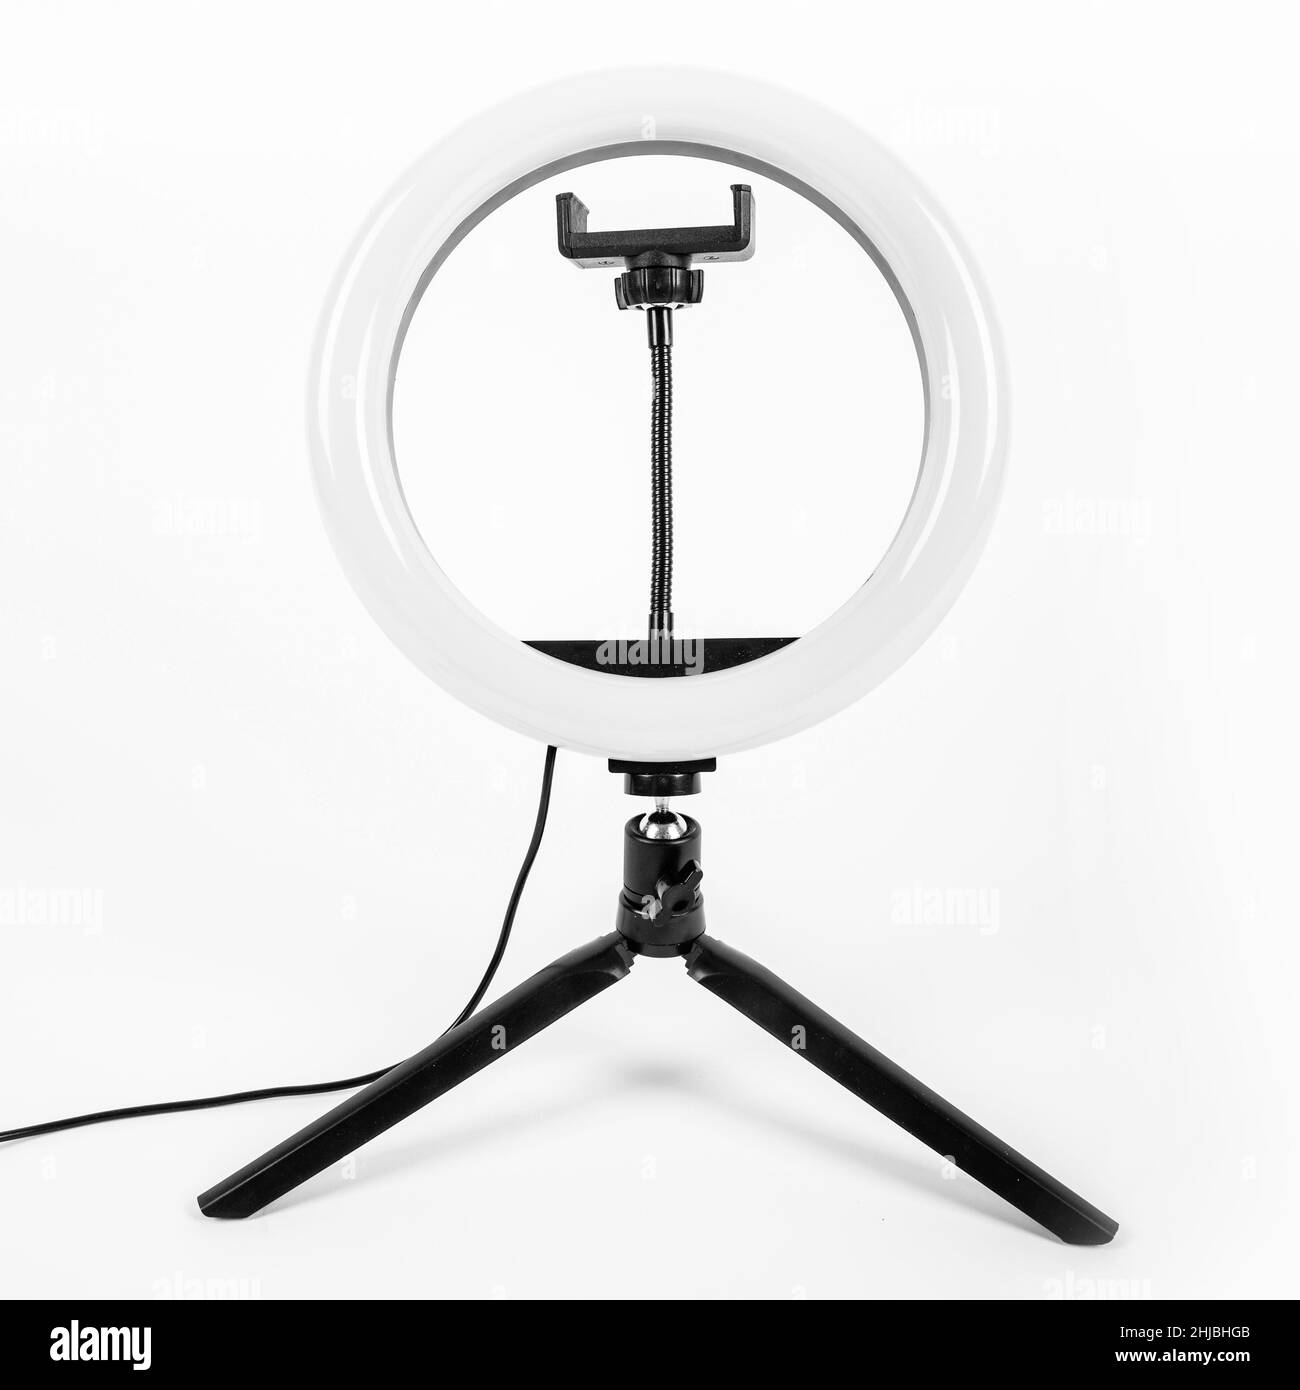 LED ring lamp on a small tripod. White background. Stock Photo